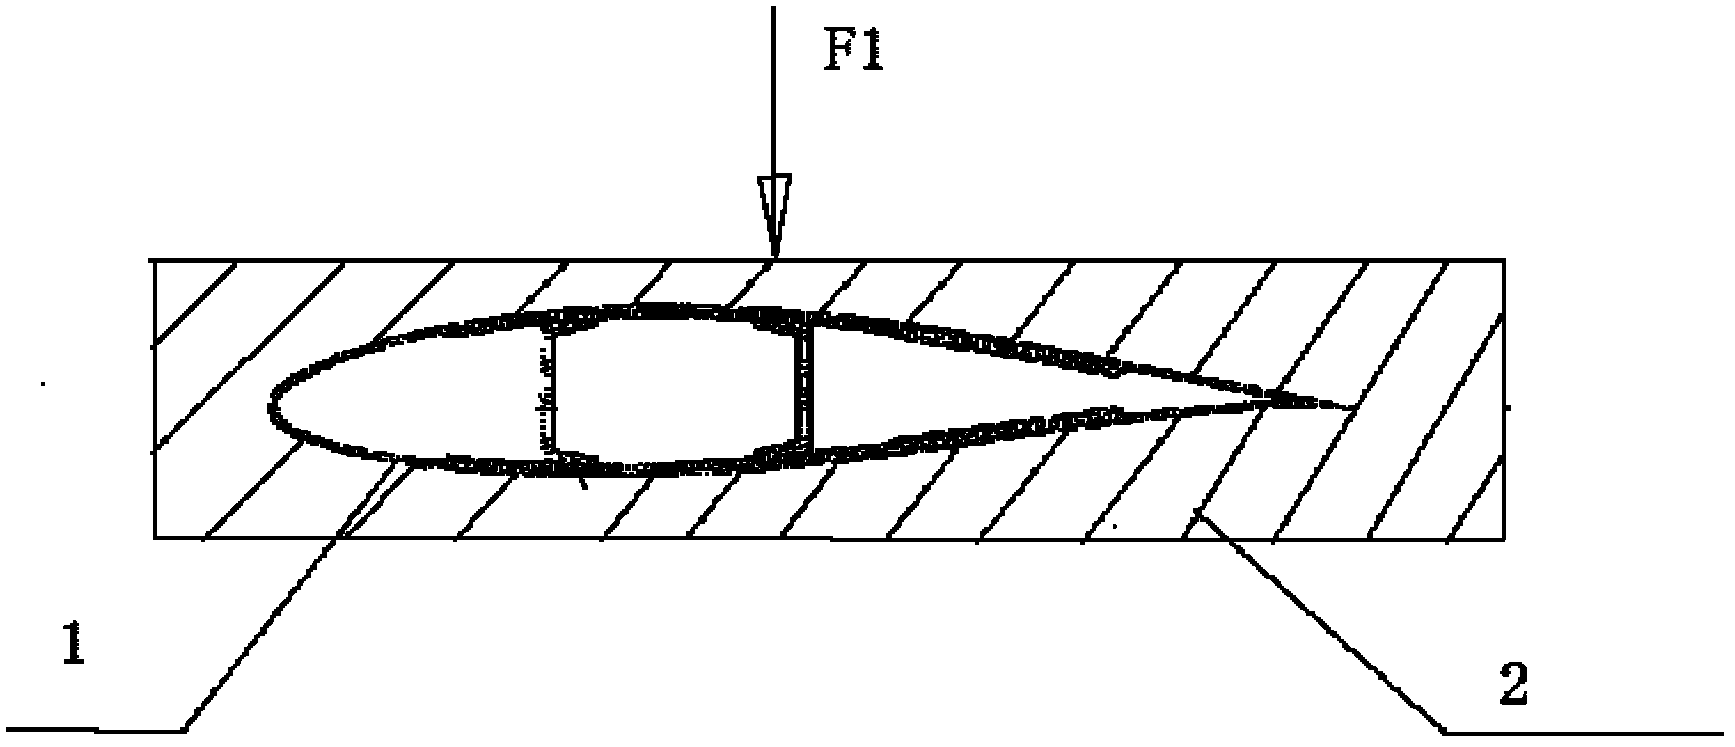 Evaluation method for fatigue damage and service life of horizontal axis wind turbine blade